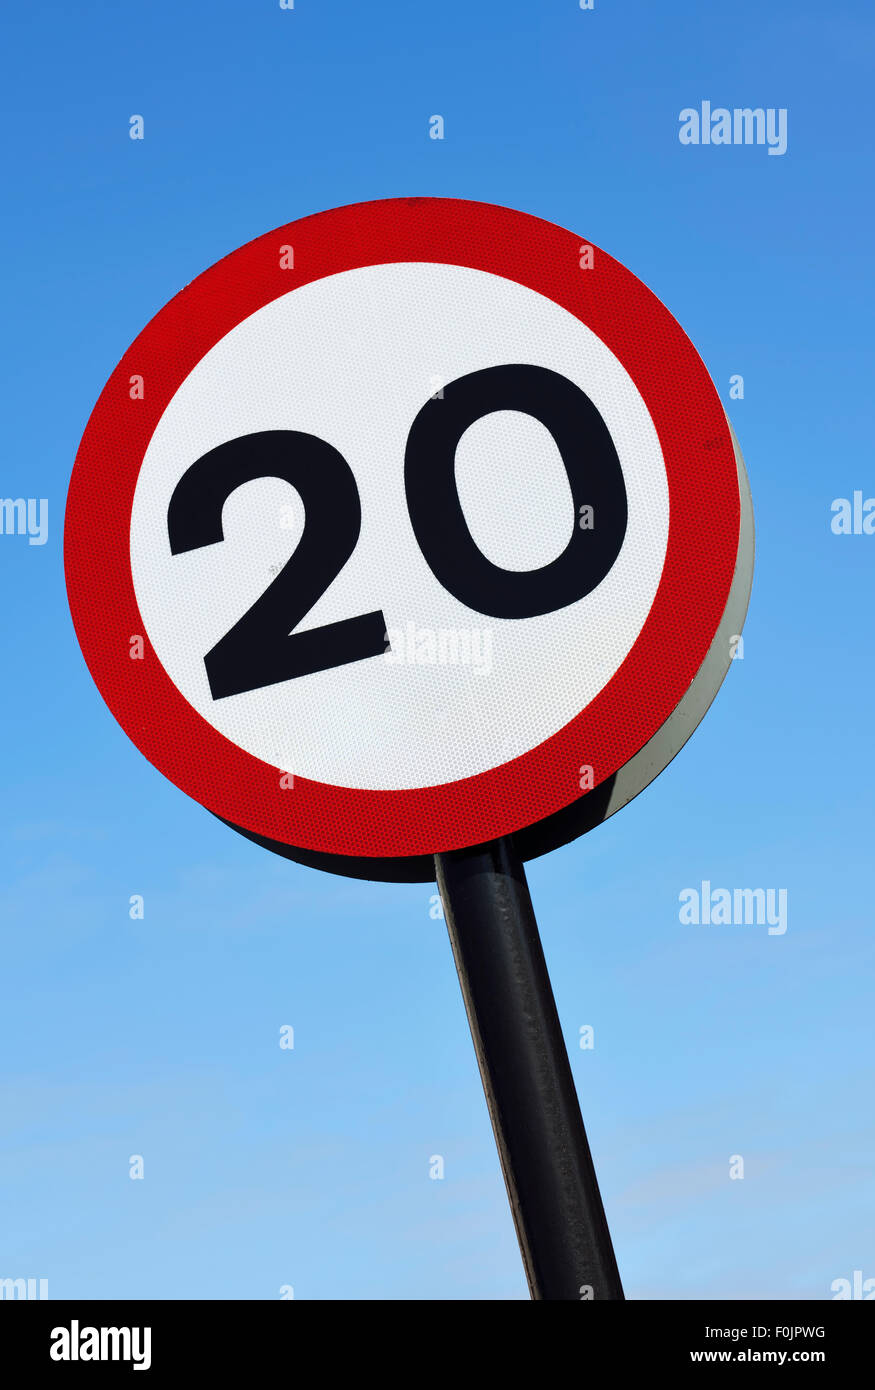 20mph speed limit road sign against blue sky Stock Photo